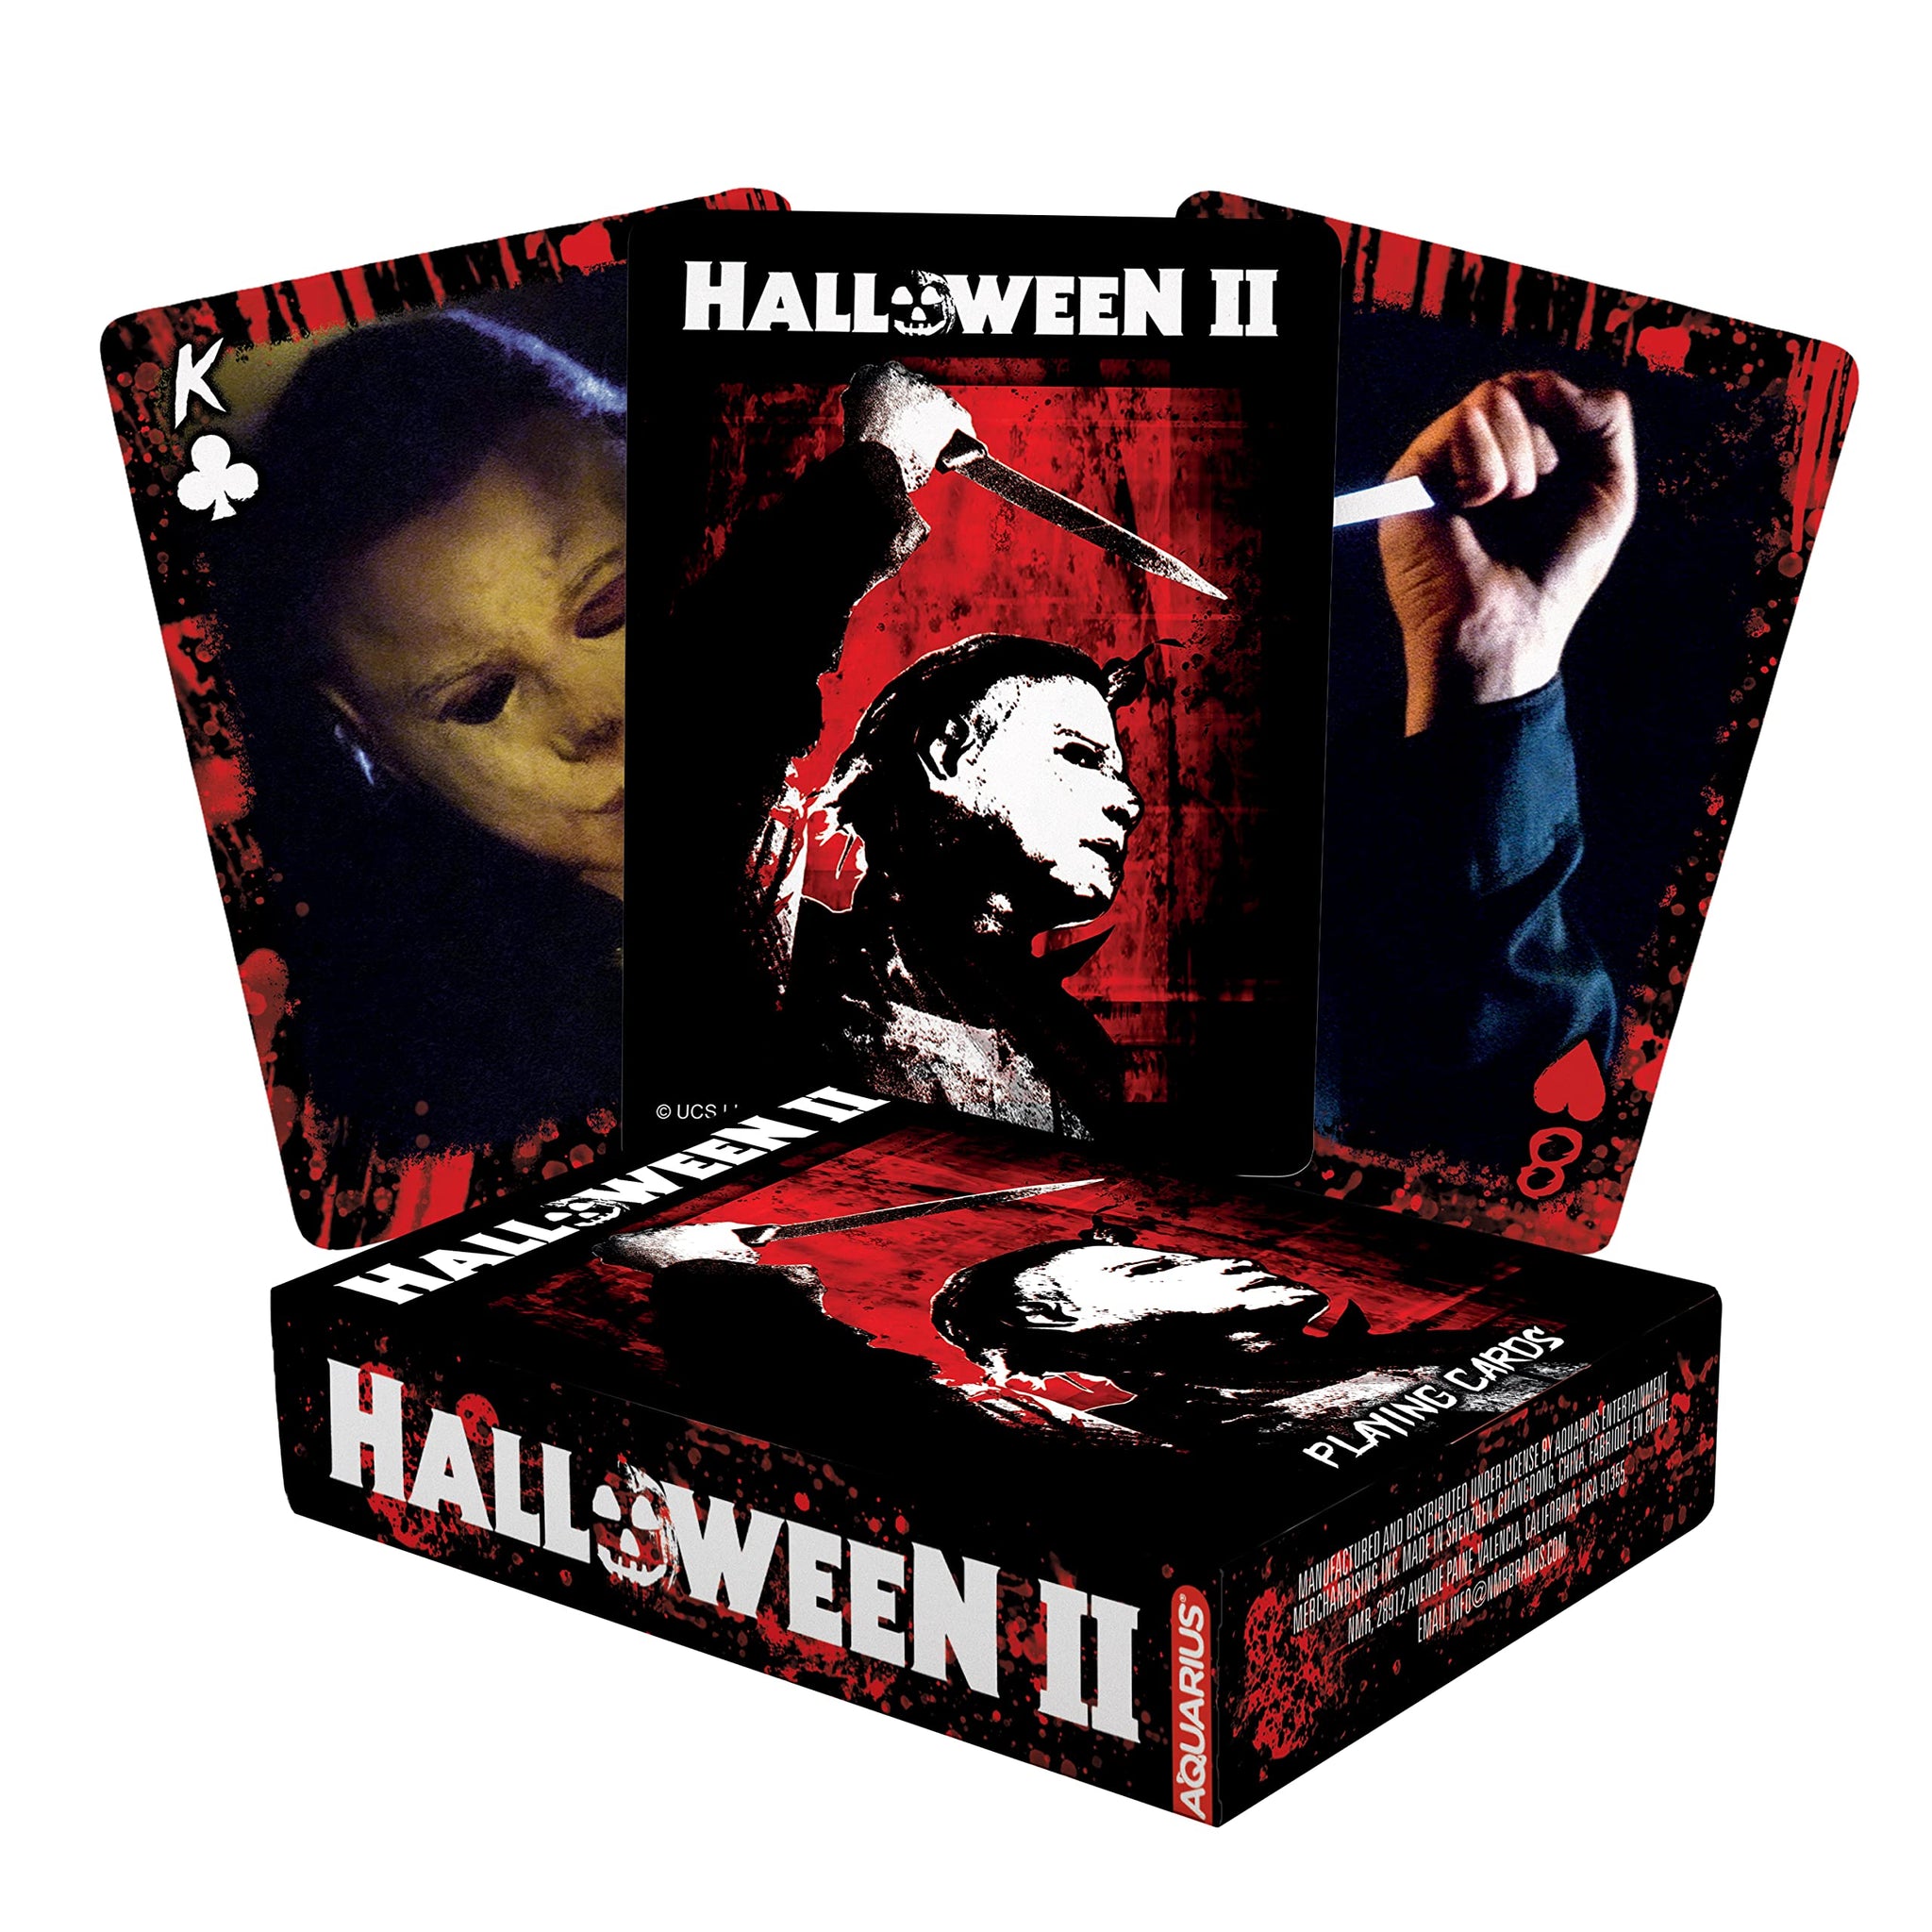 A deck of playing cards themed around the classic 1981 horror film ﻿Halloween 2